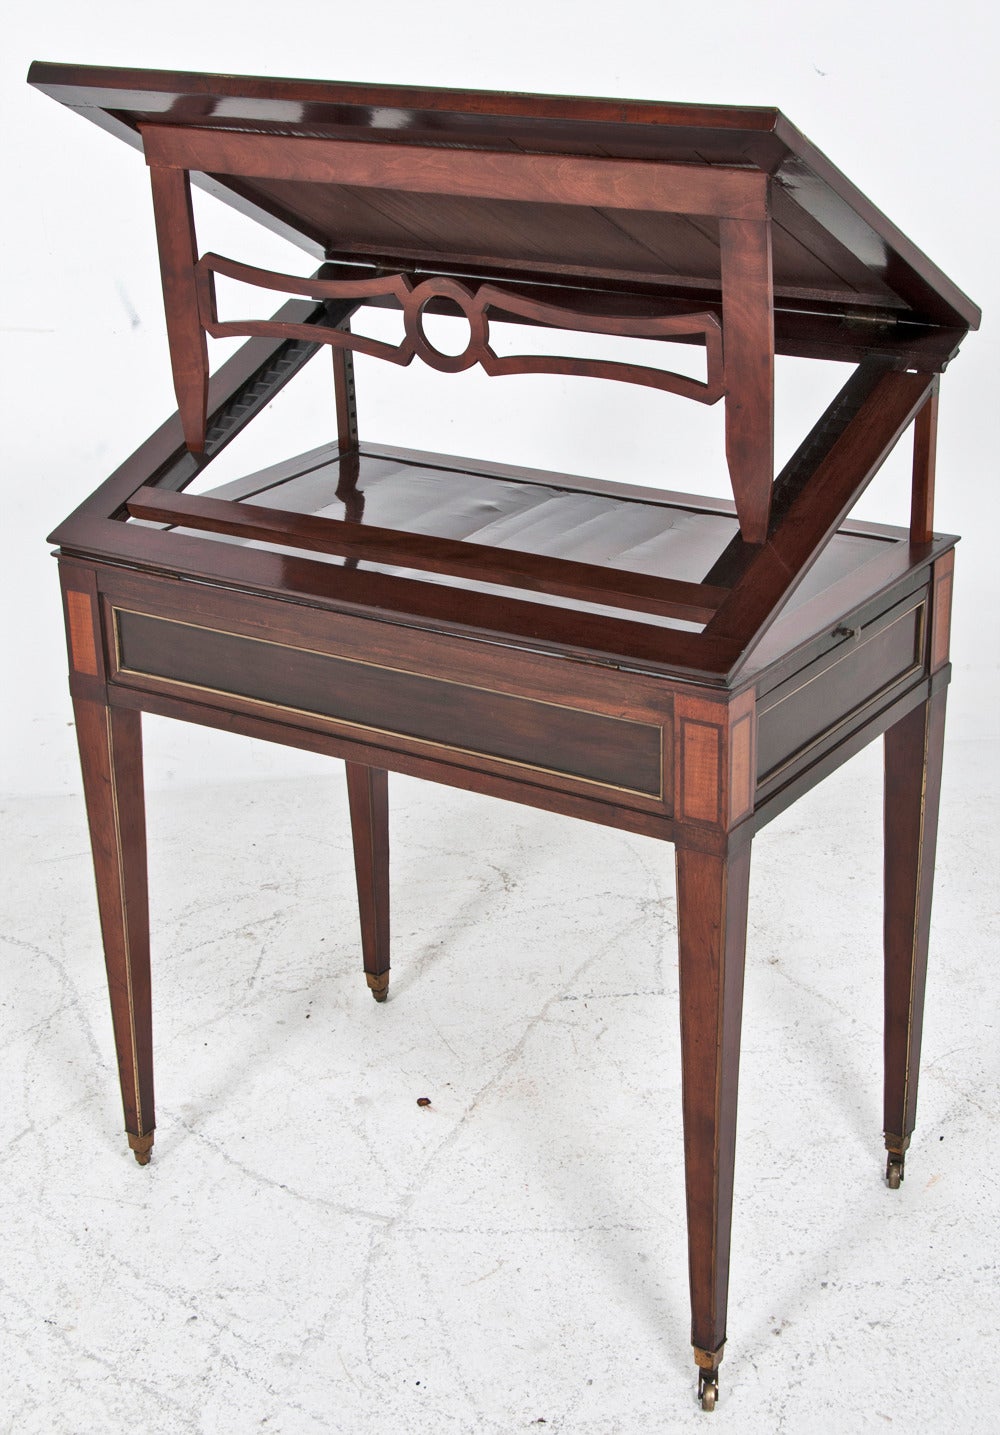 Baltic Inlaid Brass-Mounted Architect's Desk 1